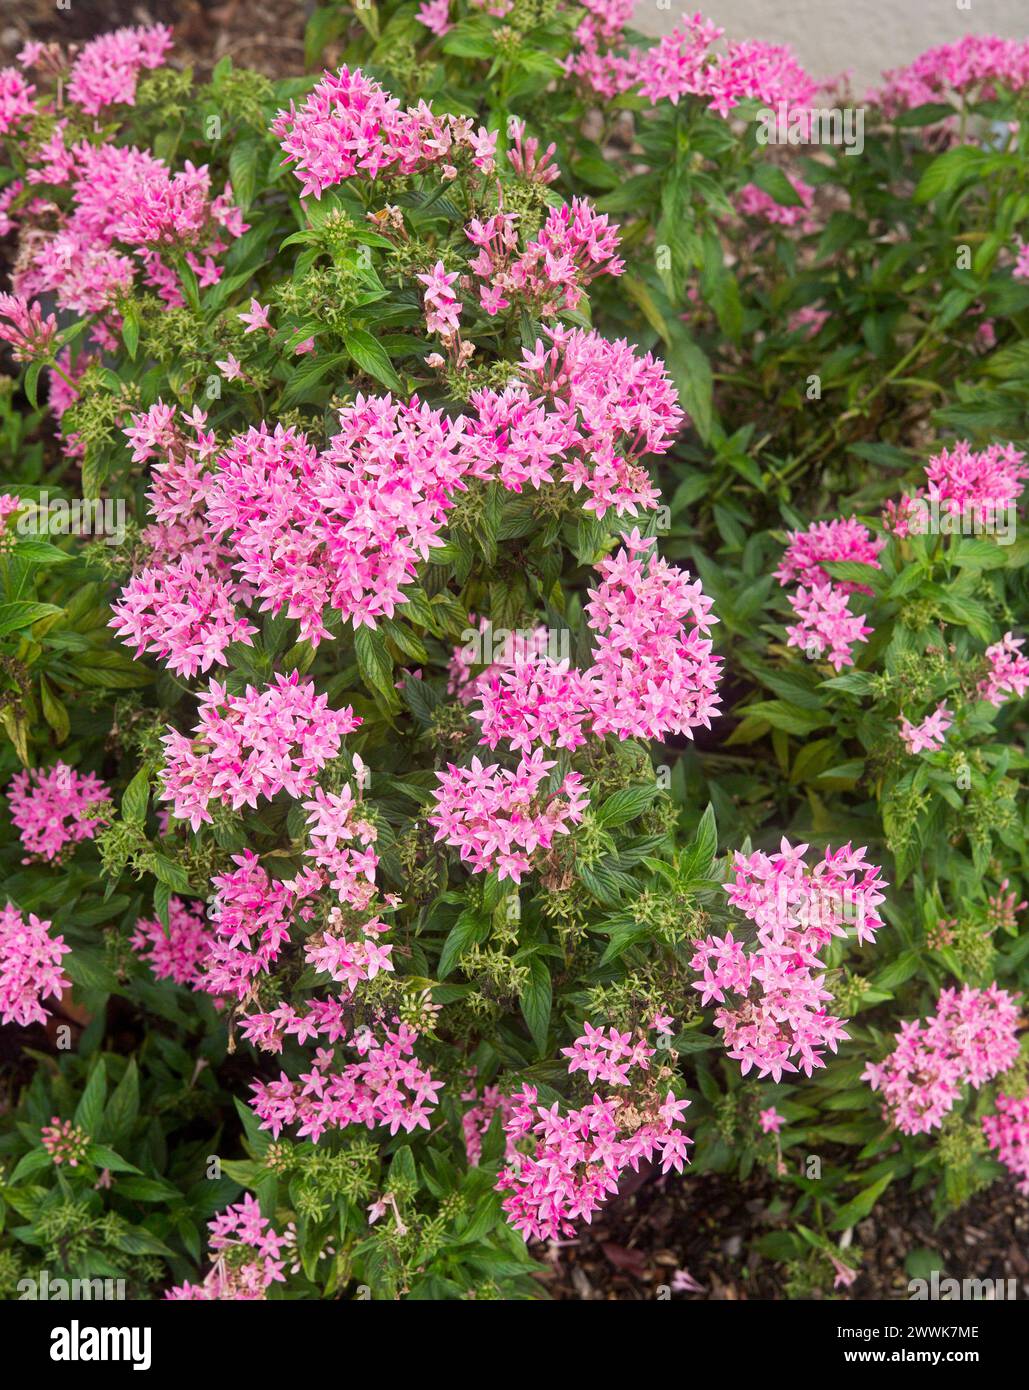 Evergreen garden shrub, Pentas lanceolata, with bright green foliage and masses of small star-shaped bright pink flowers, in Australia Stock Photo